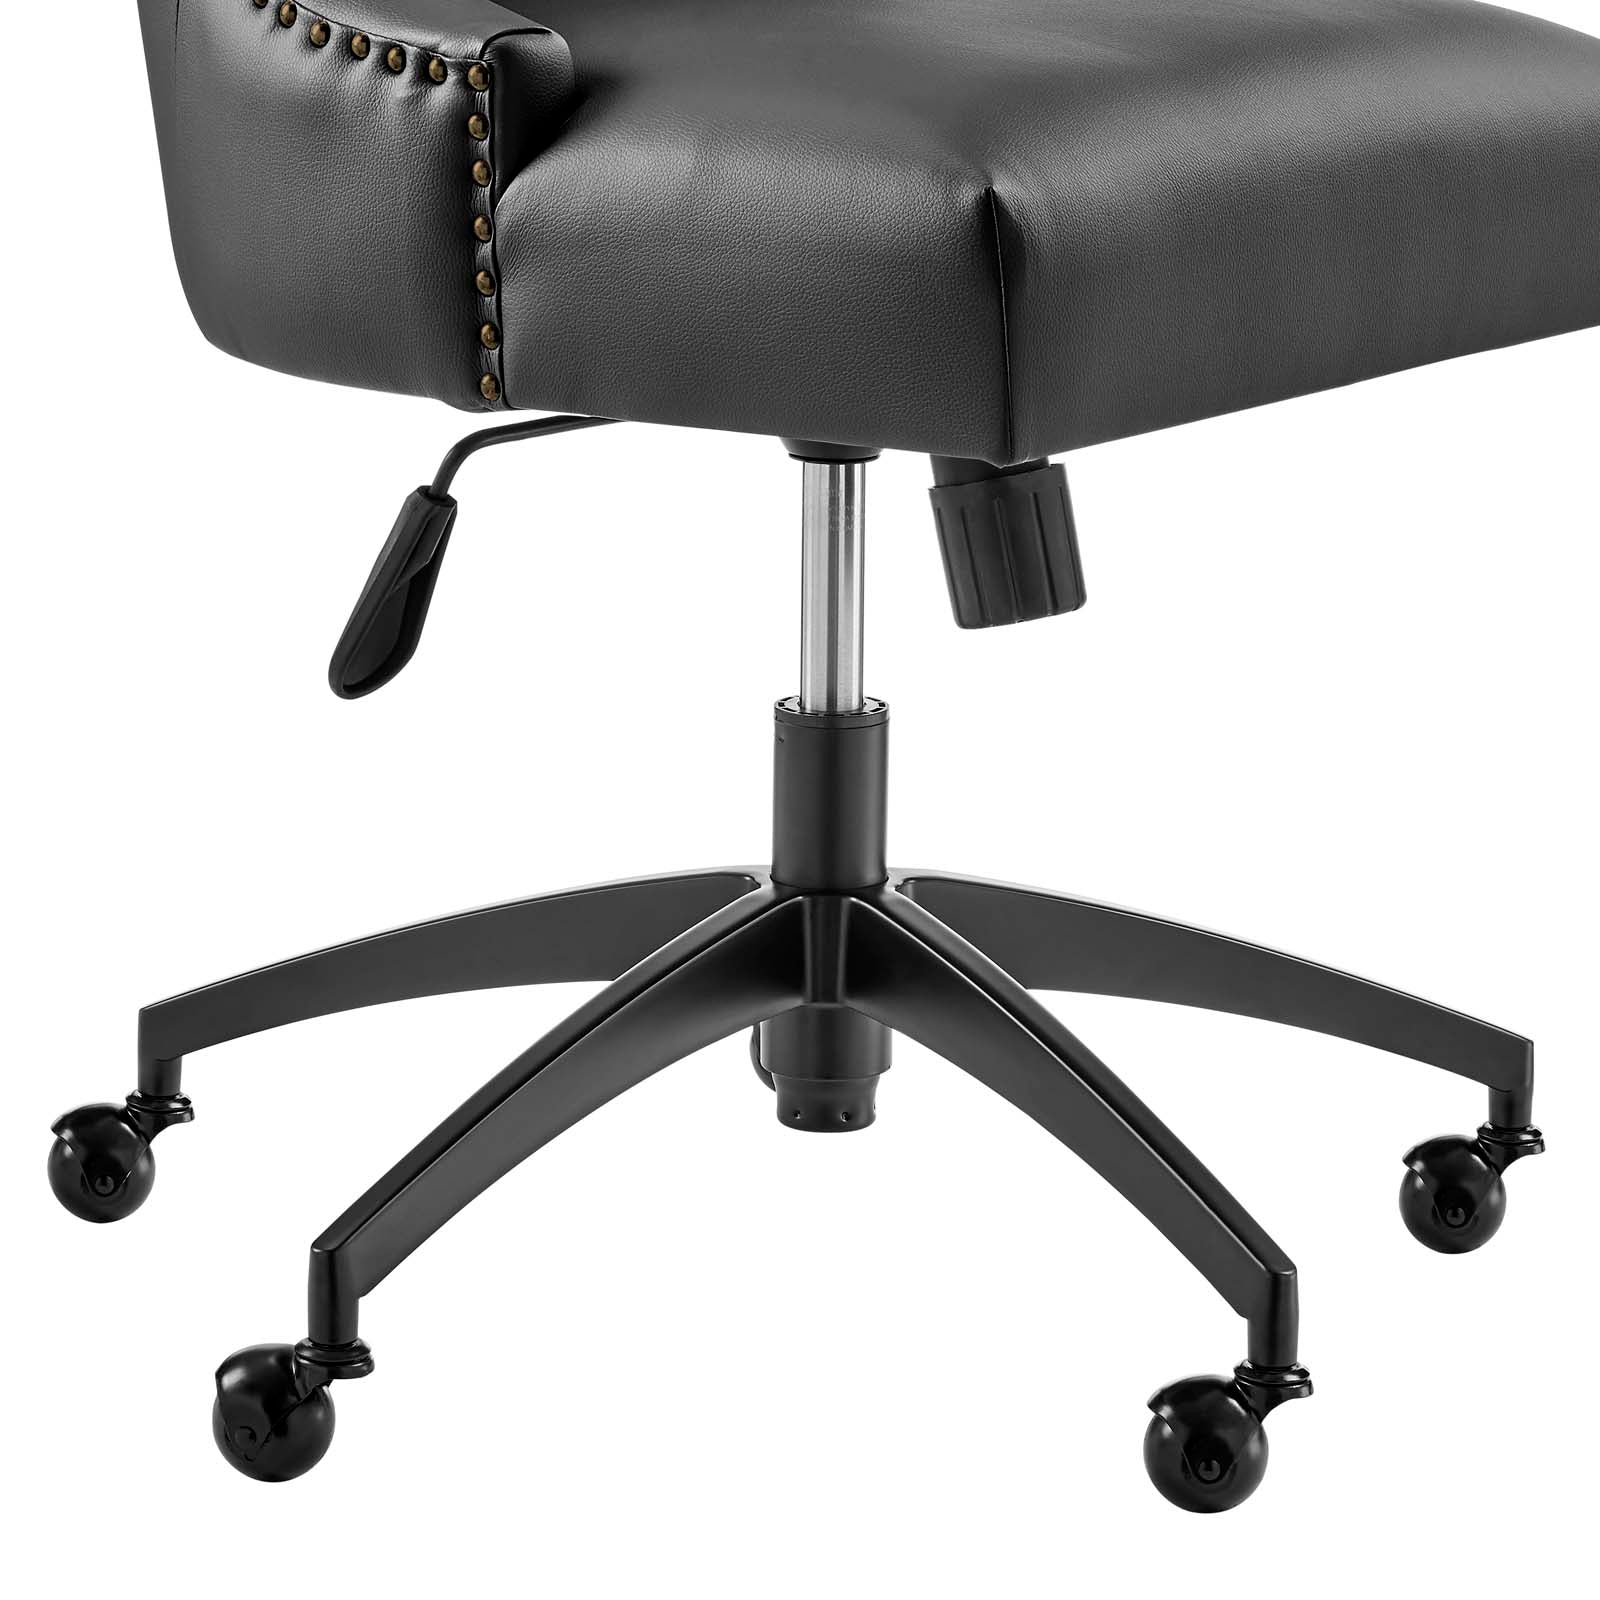 Modway Task Chairs - Empower Channel Tufted Vegan Leather Office Chair Black Black